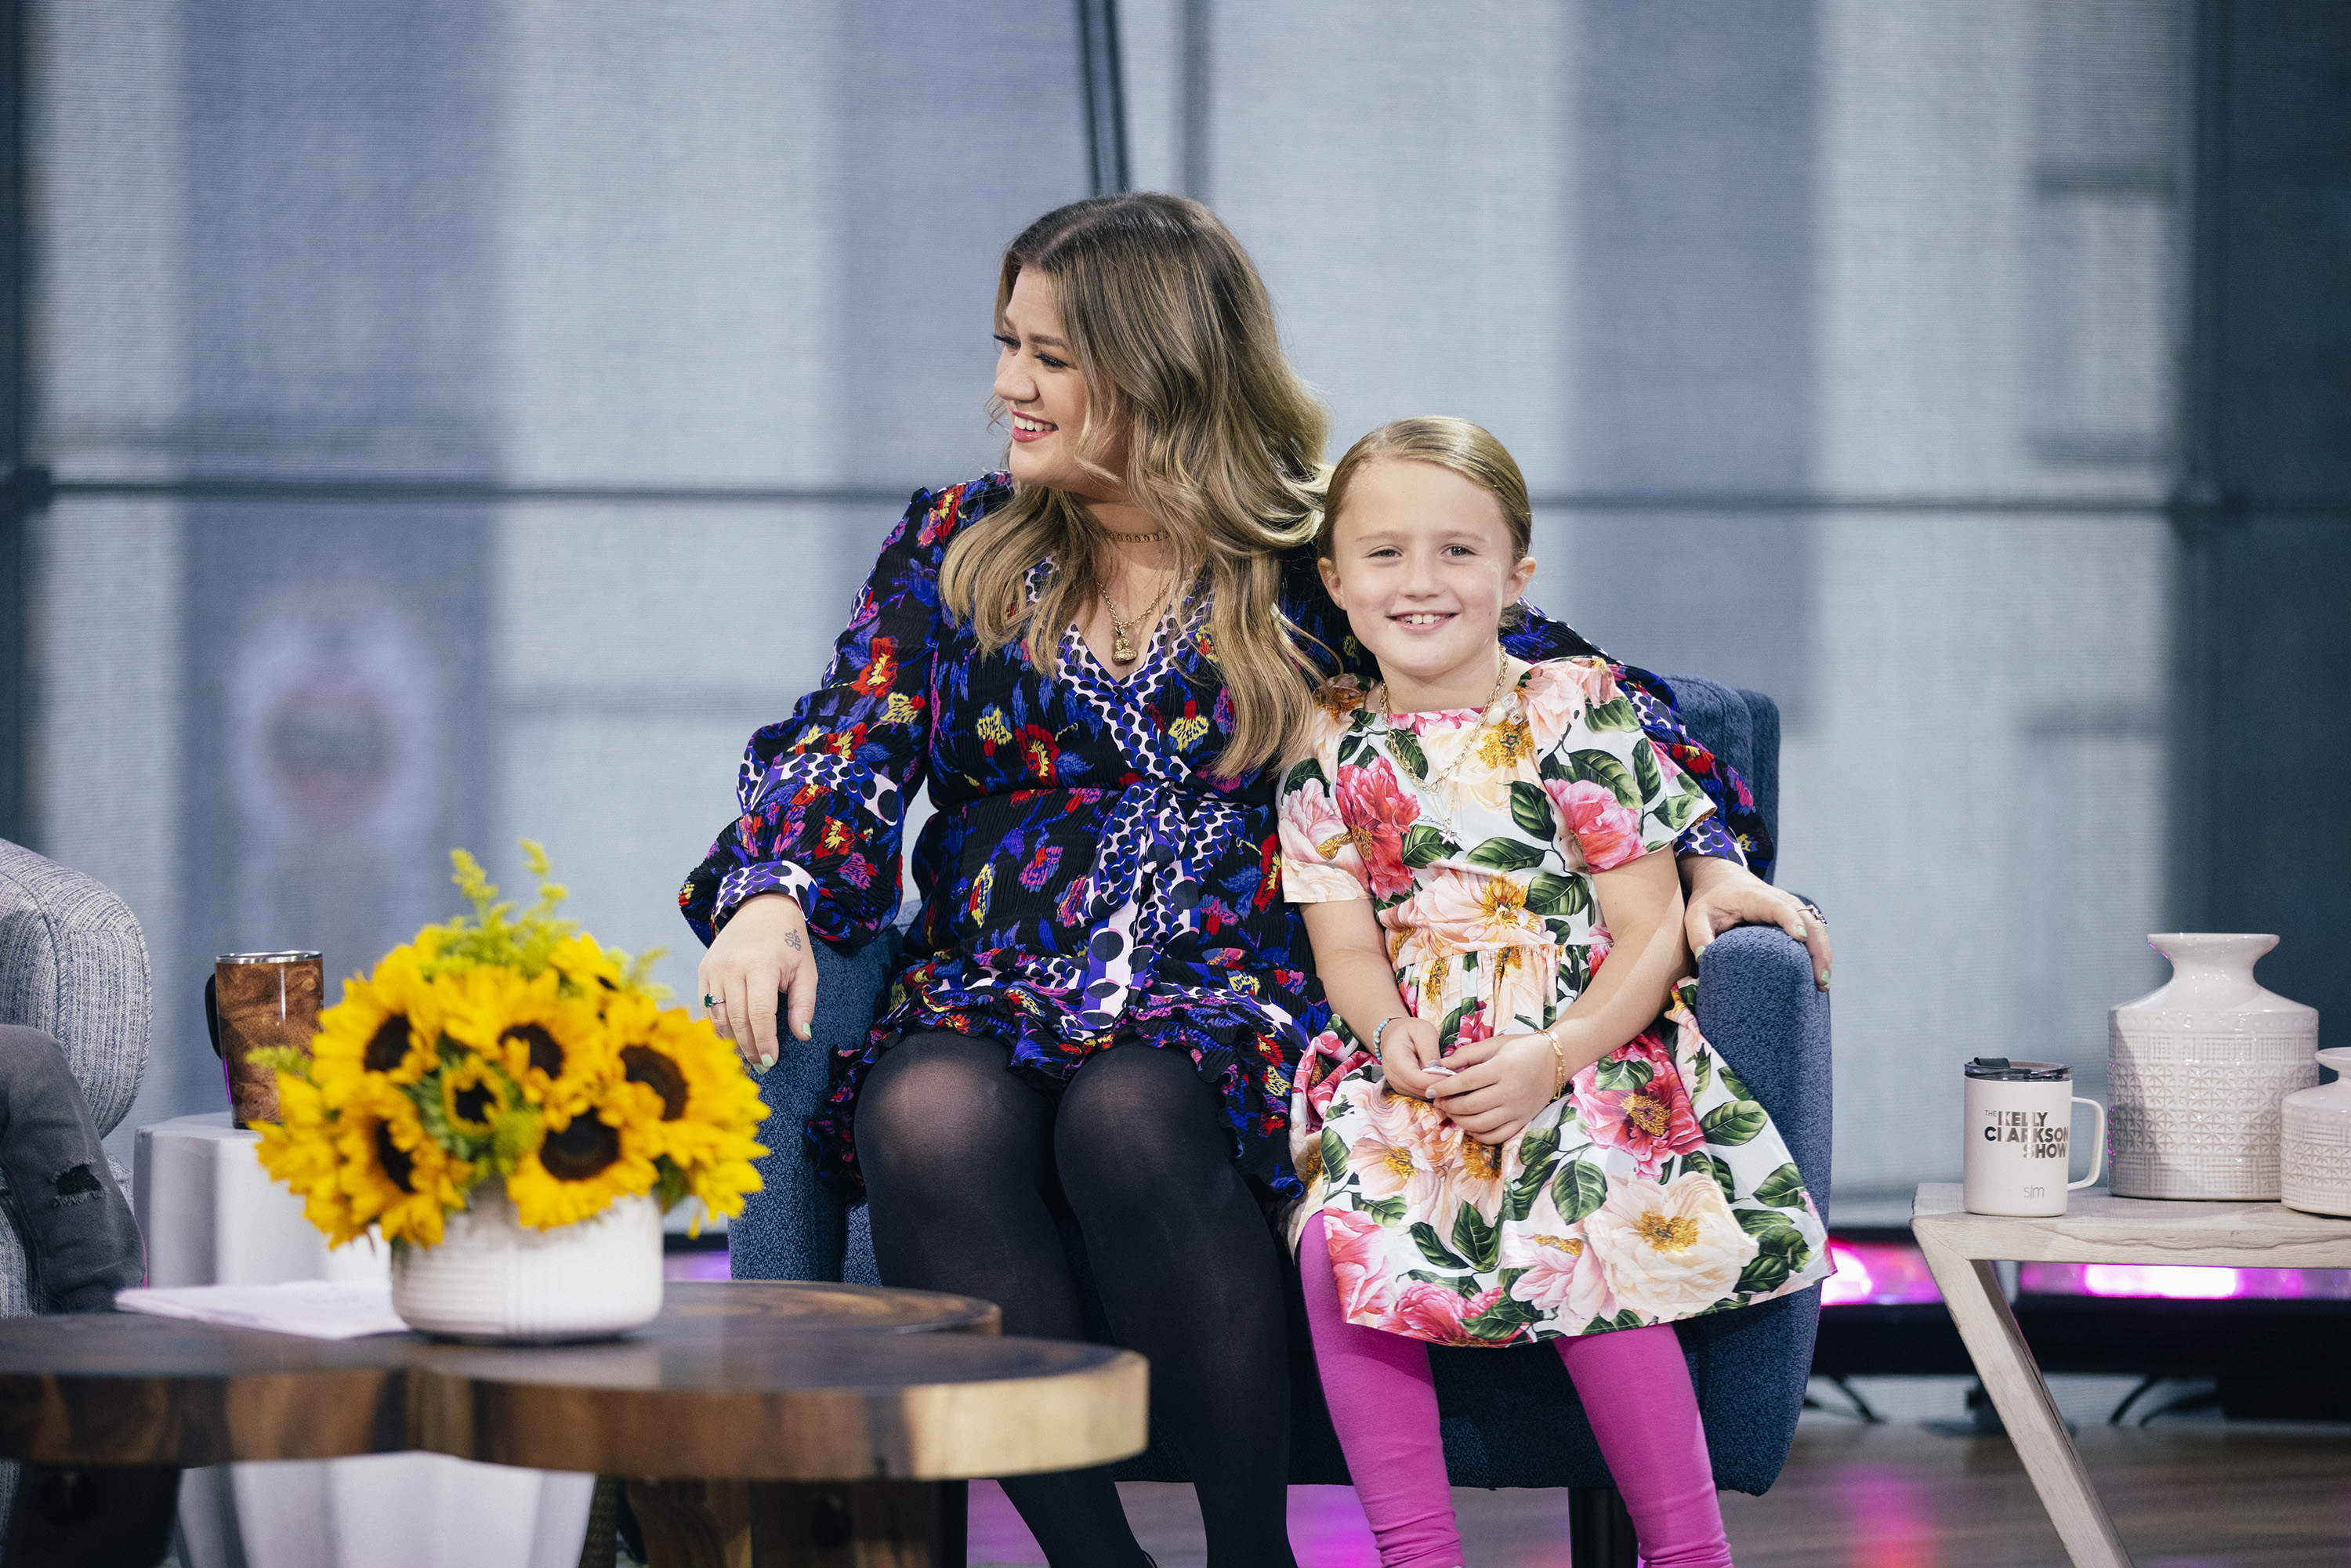 Kelly Clarkson pictured with her daughter River during "The Kelly Clarkson Show" episode 1003 Season 3 on August 25, 2021 | Source: Getty Images